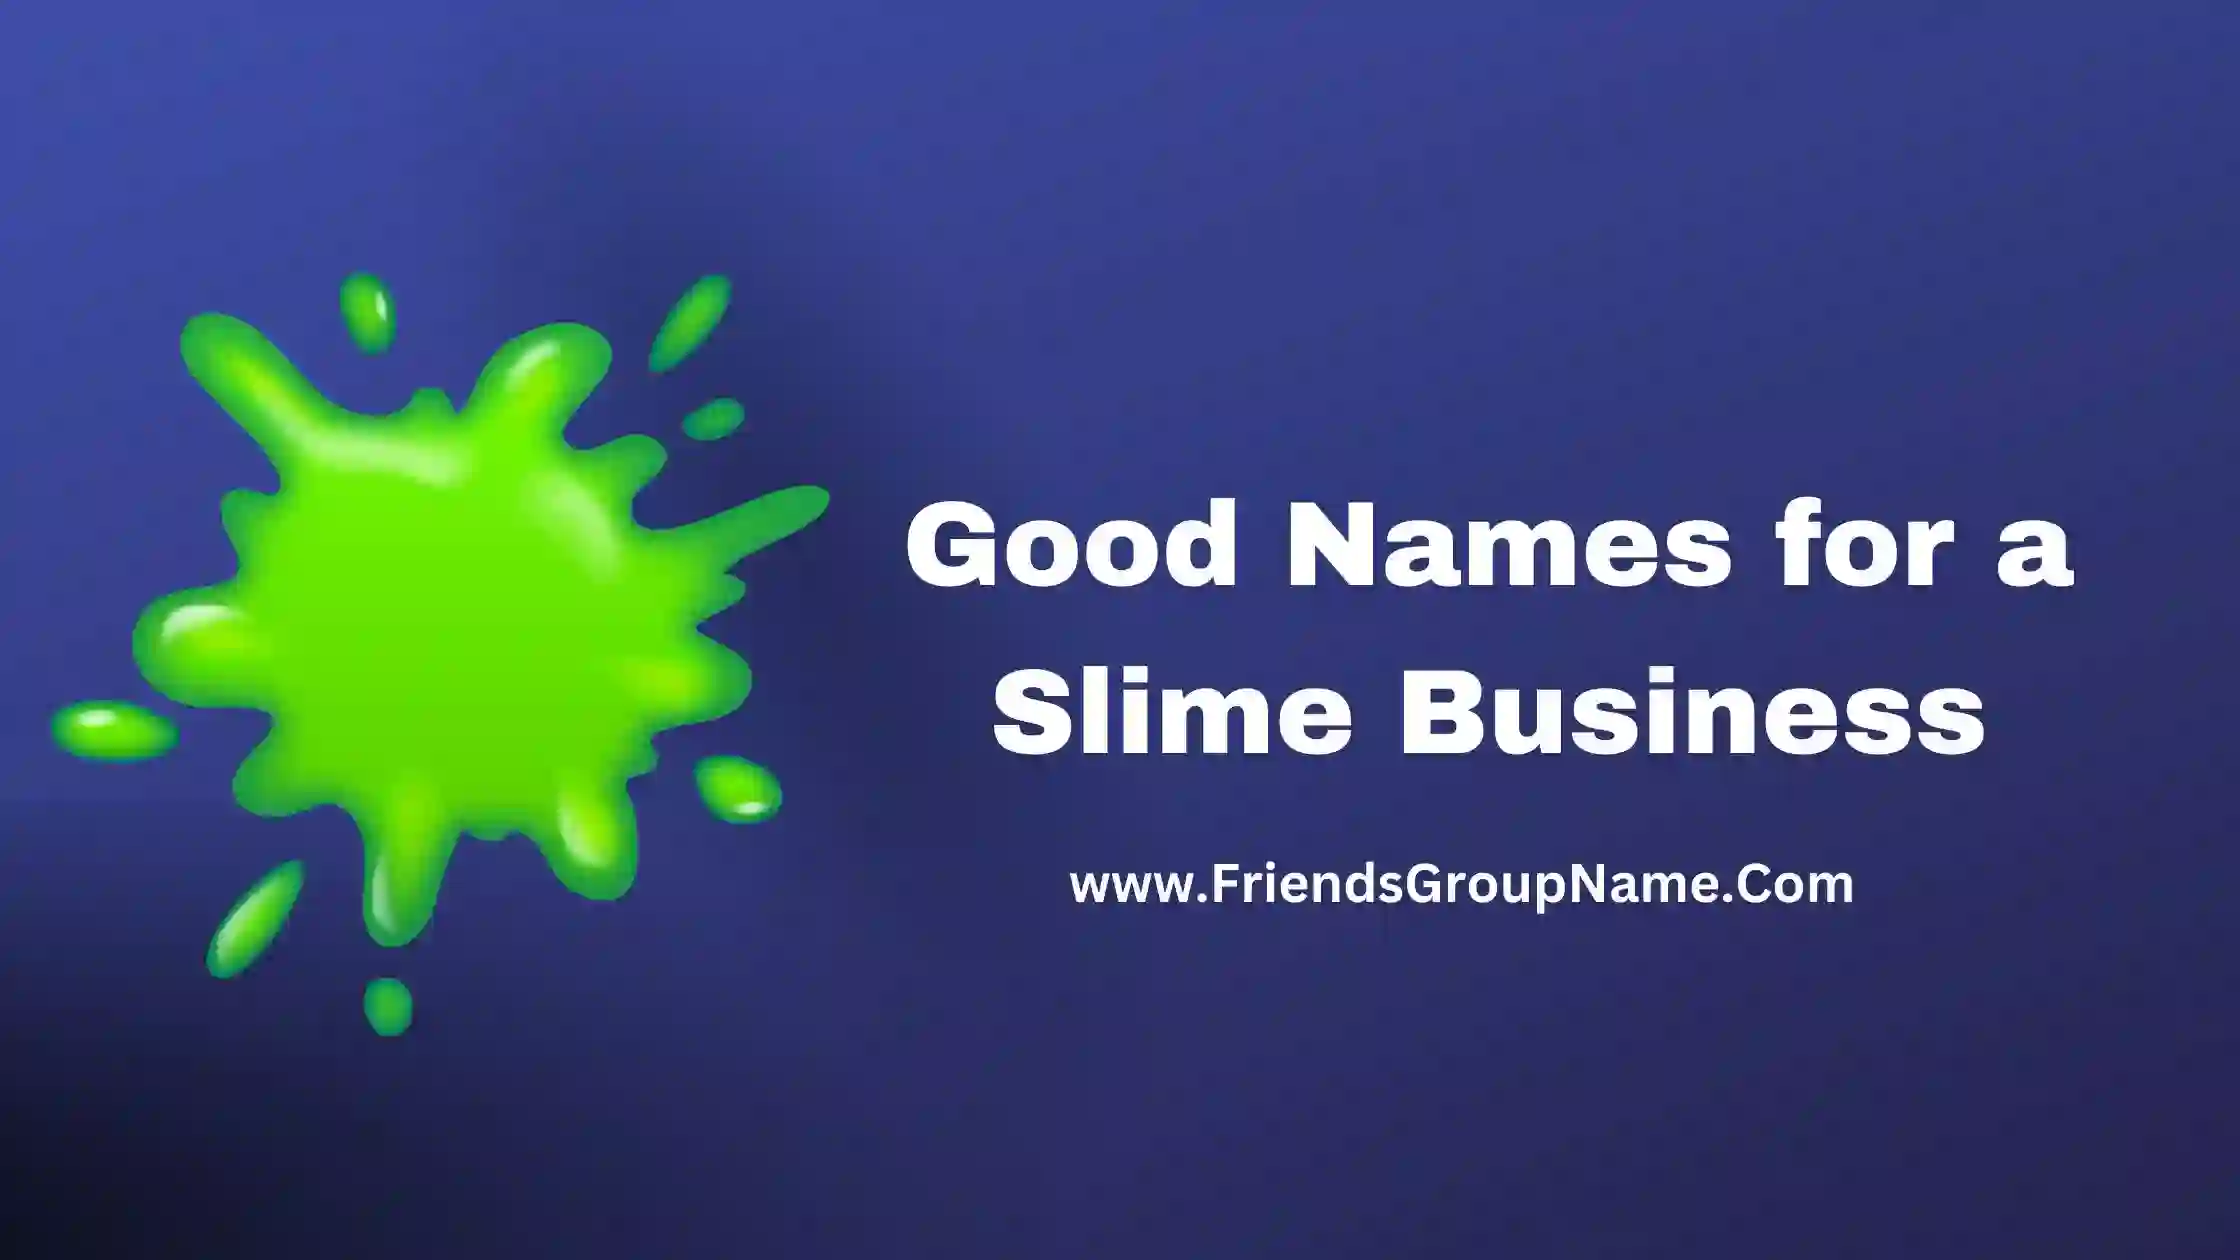 Good Names for a Slime Business